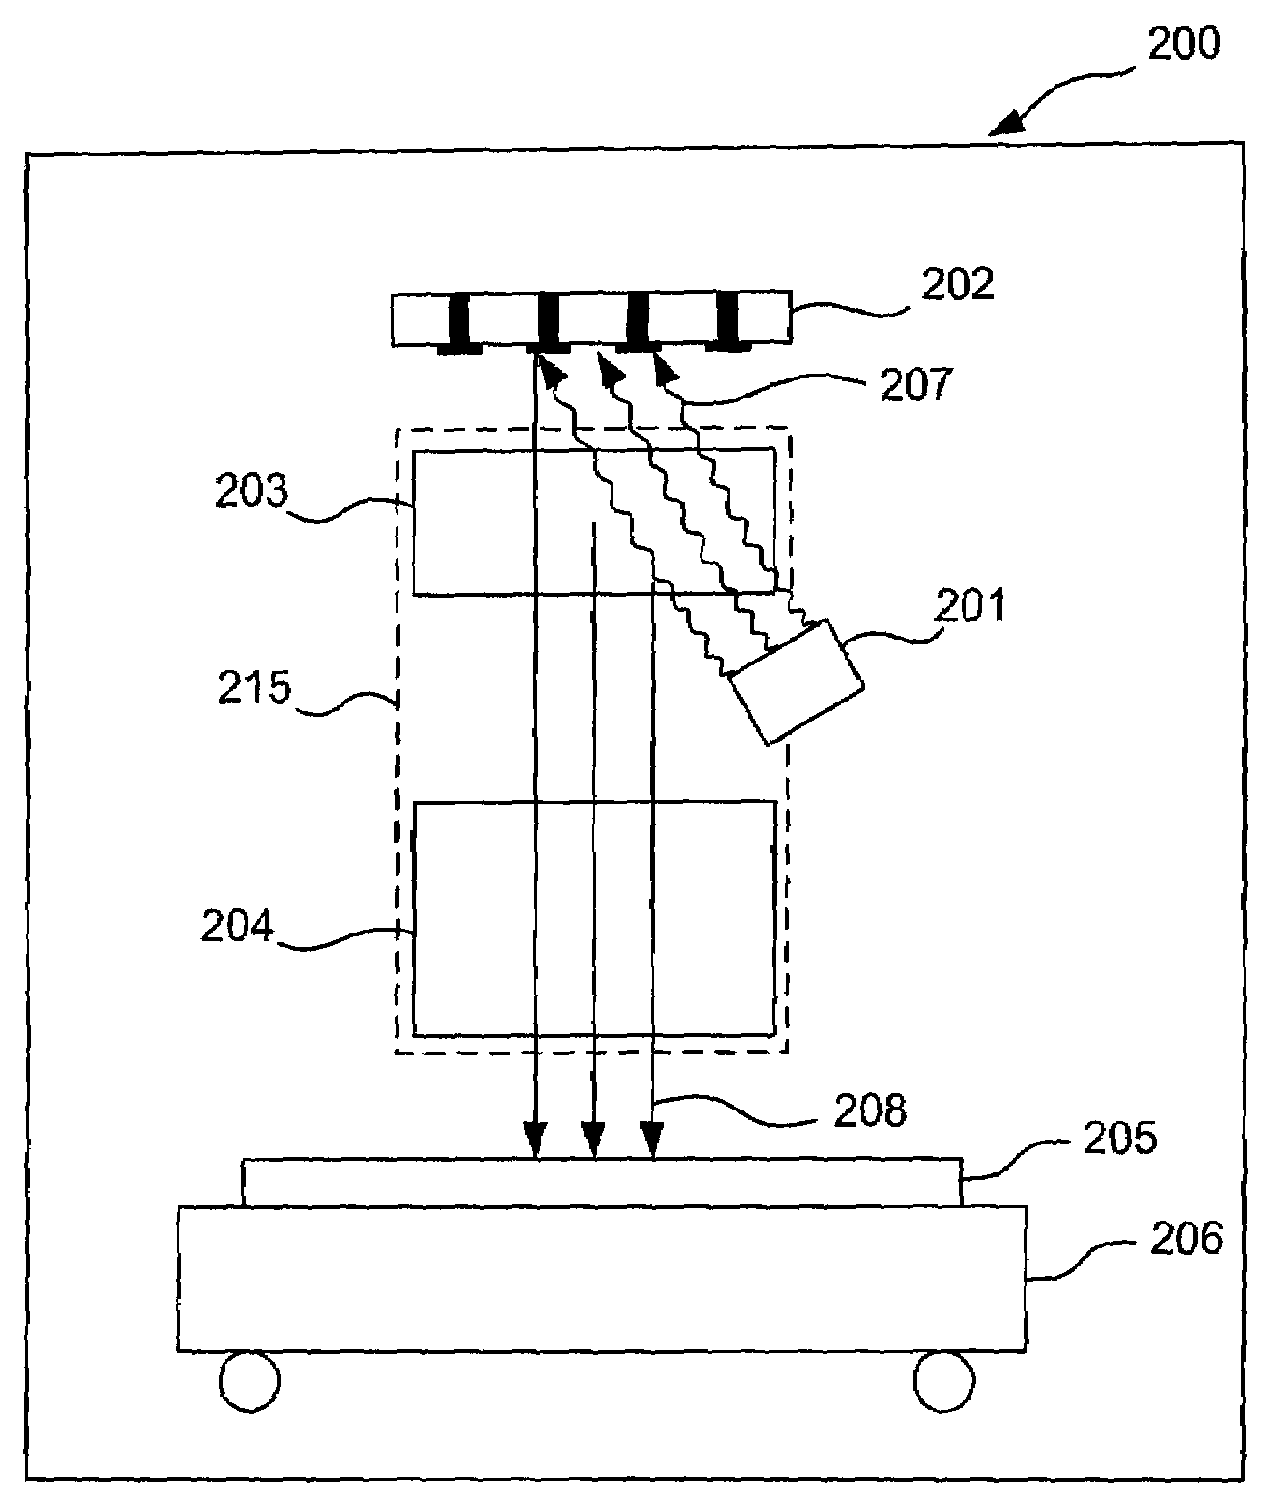 Electron beam lithography method and apparatus using a dynamically controlled photocathode